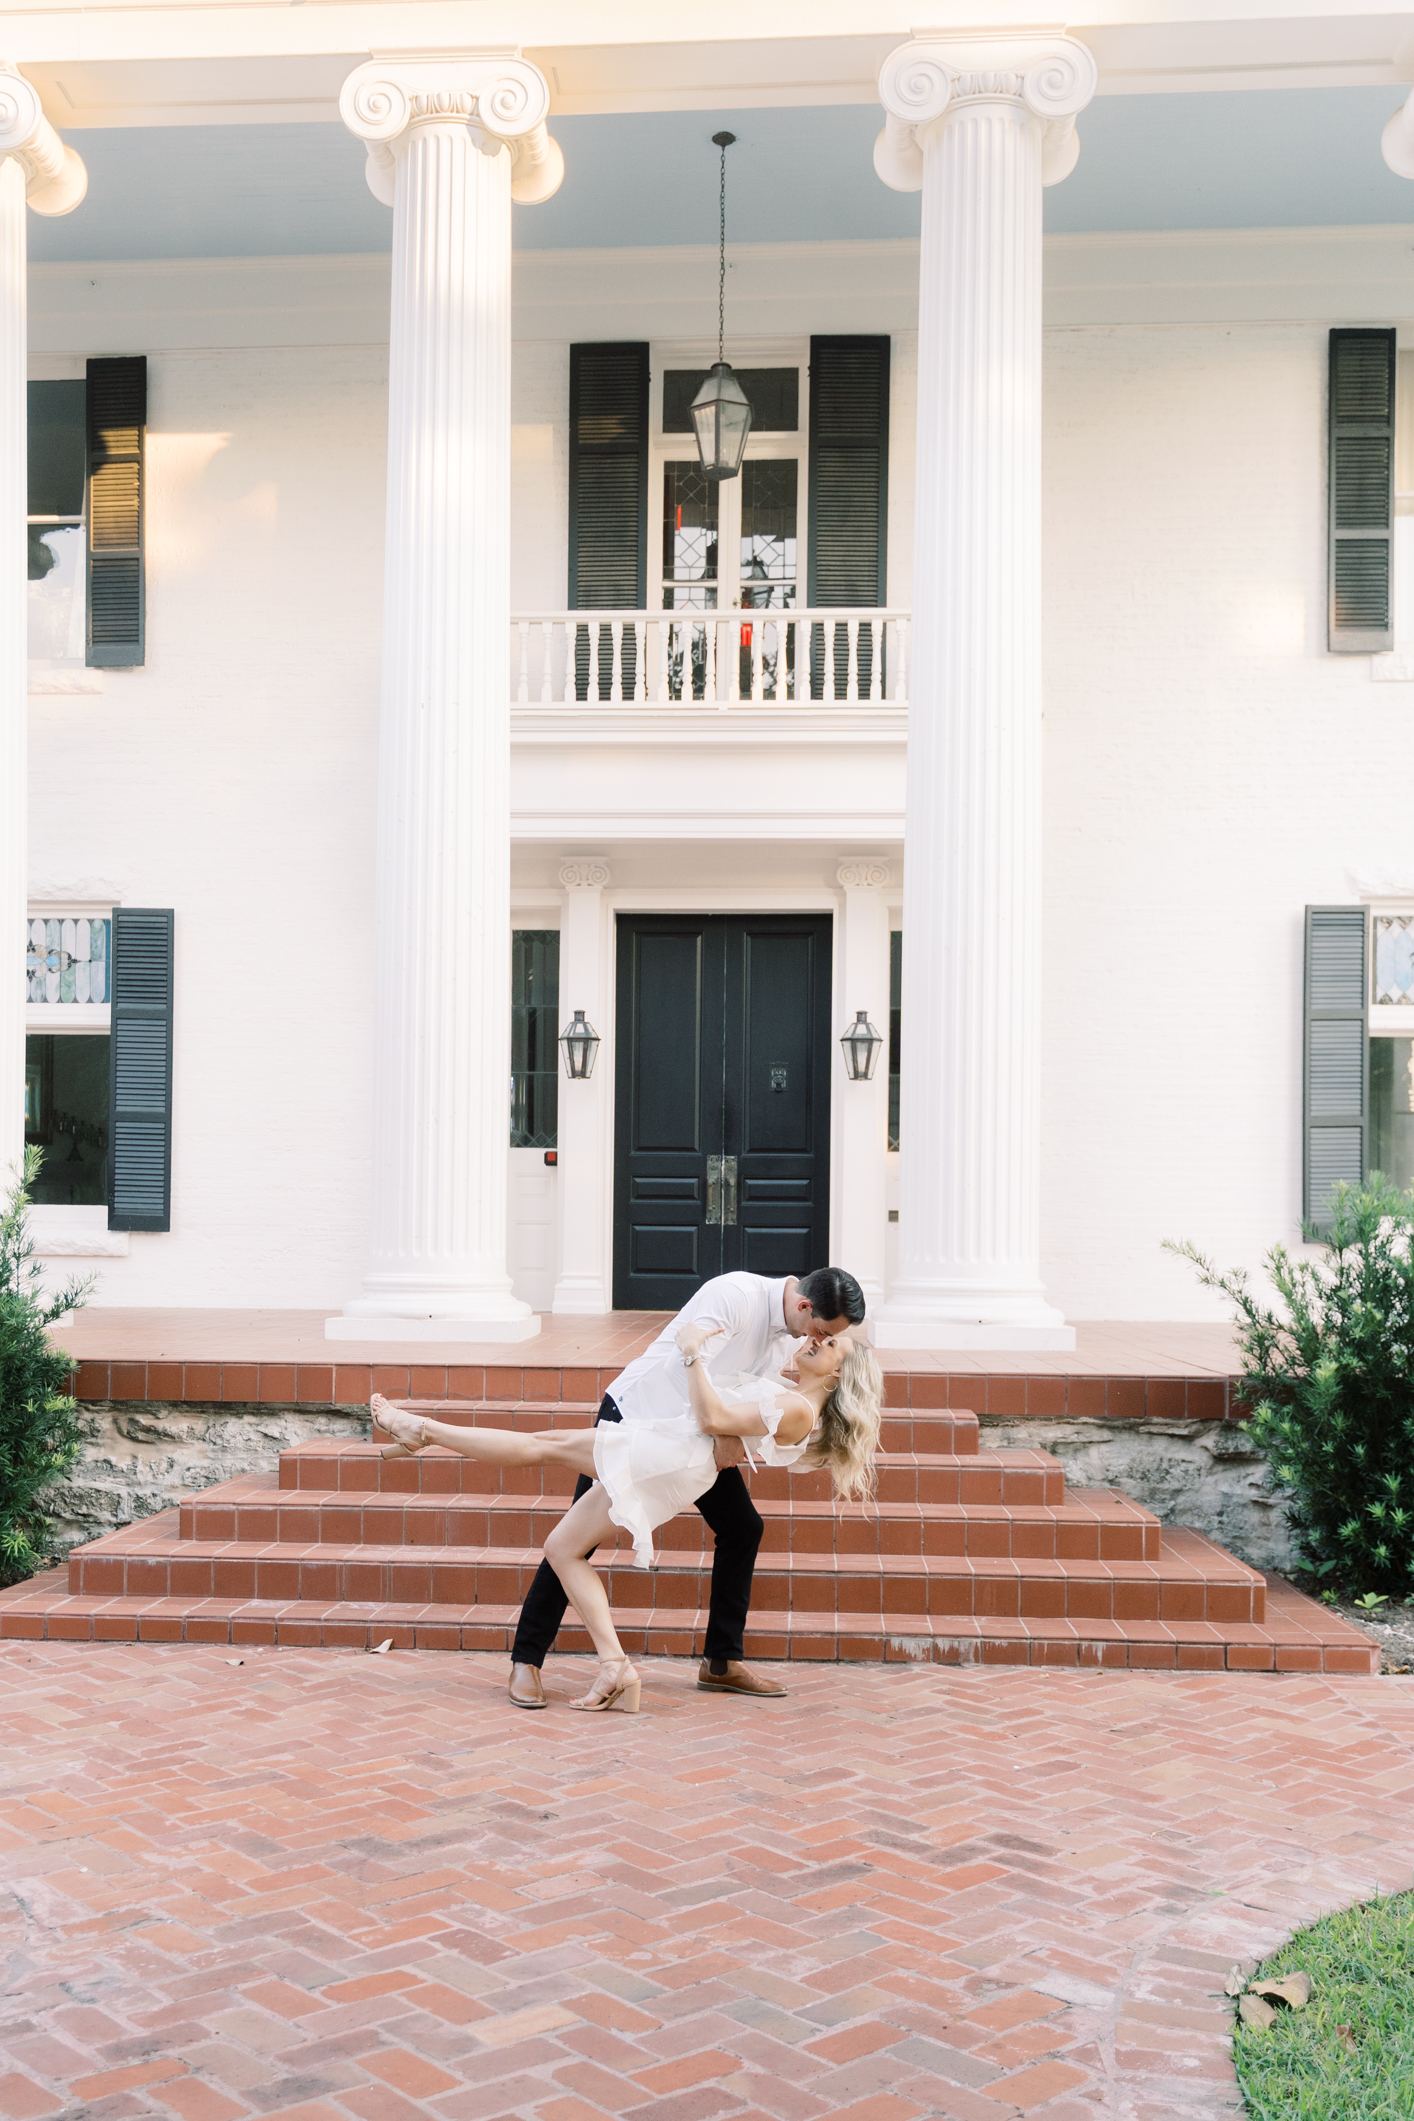 Perfect lighting + an adorable couple = the perfect Woodbine Mansion engagement session! This is seriously the best venue in Austin!